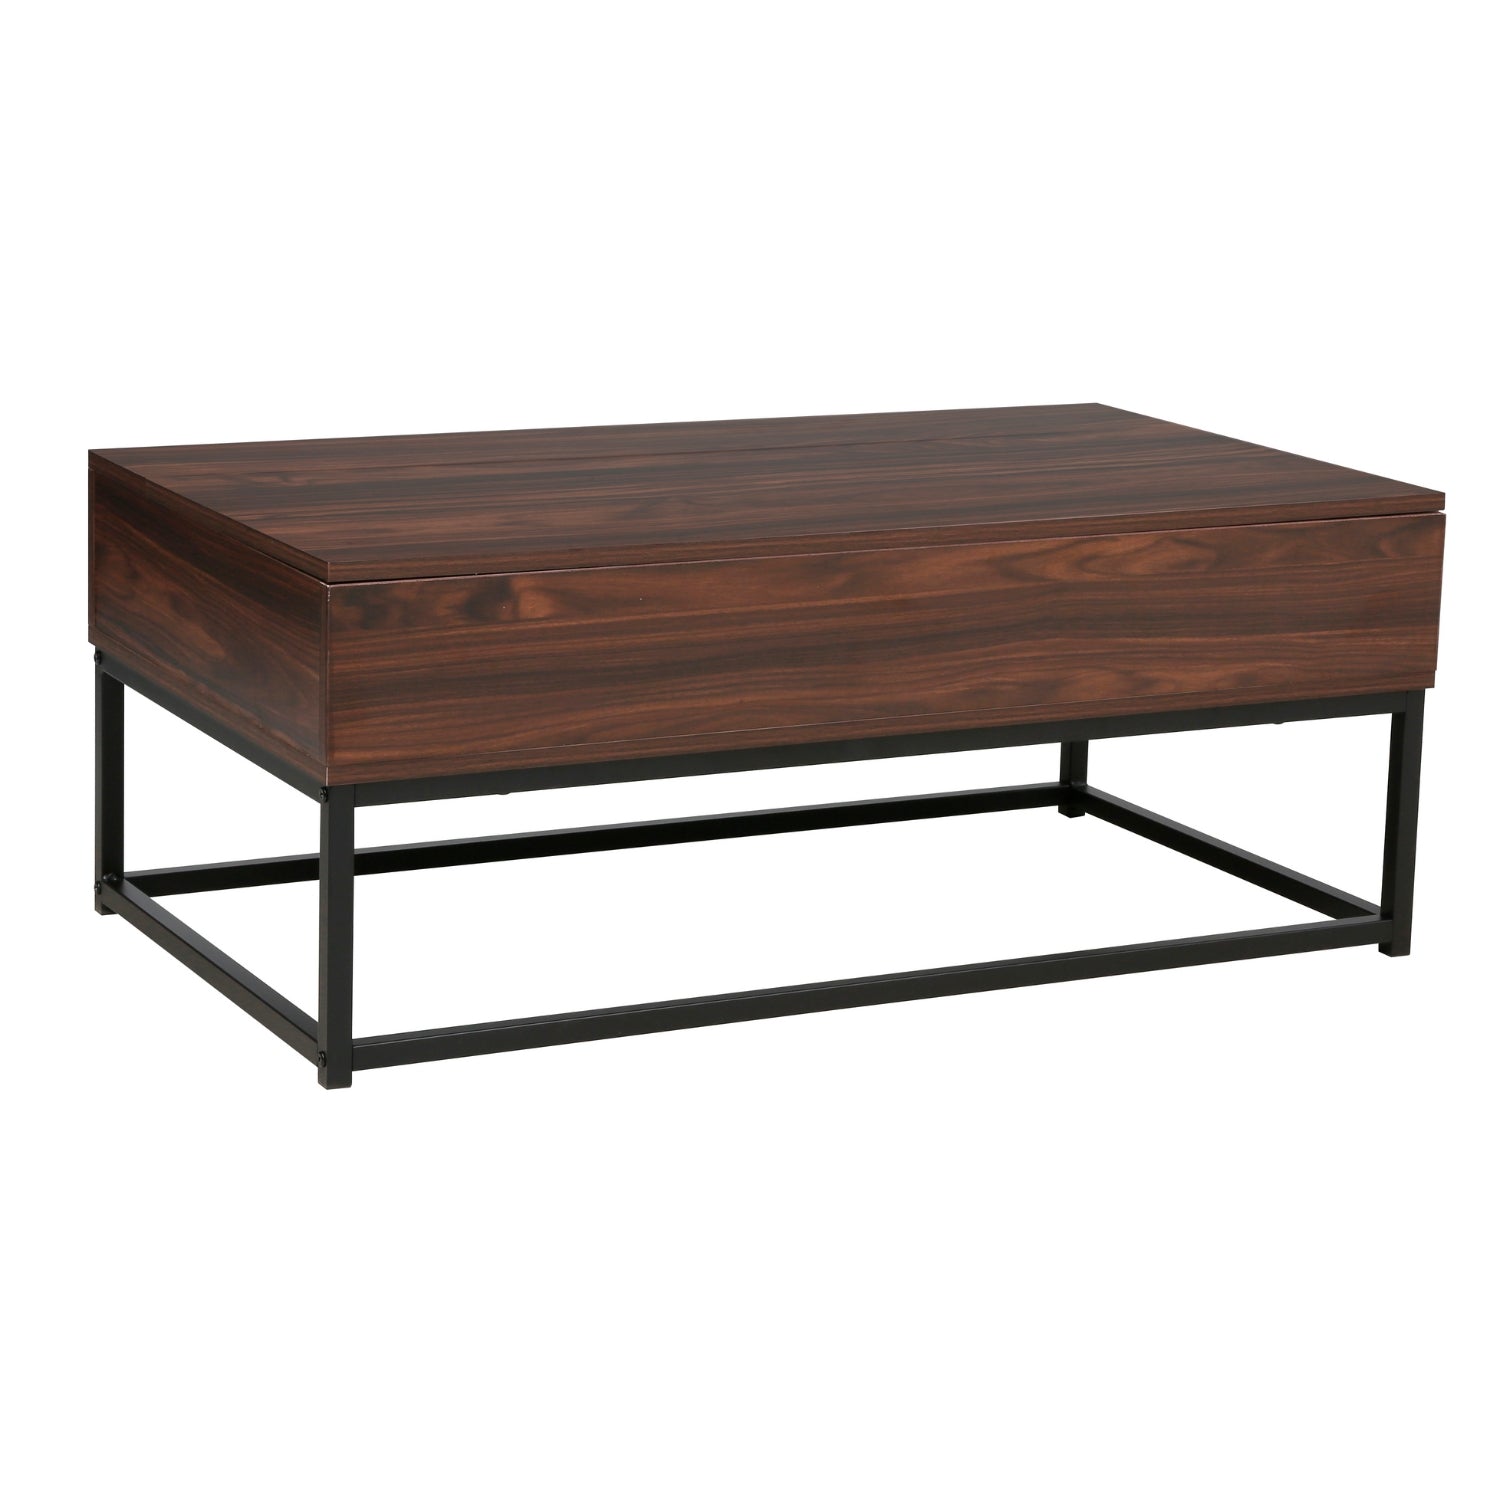 Sleek coffee table with black metal frame and wooden top.